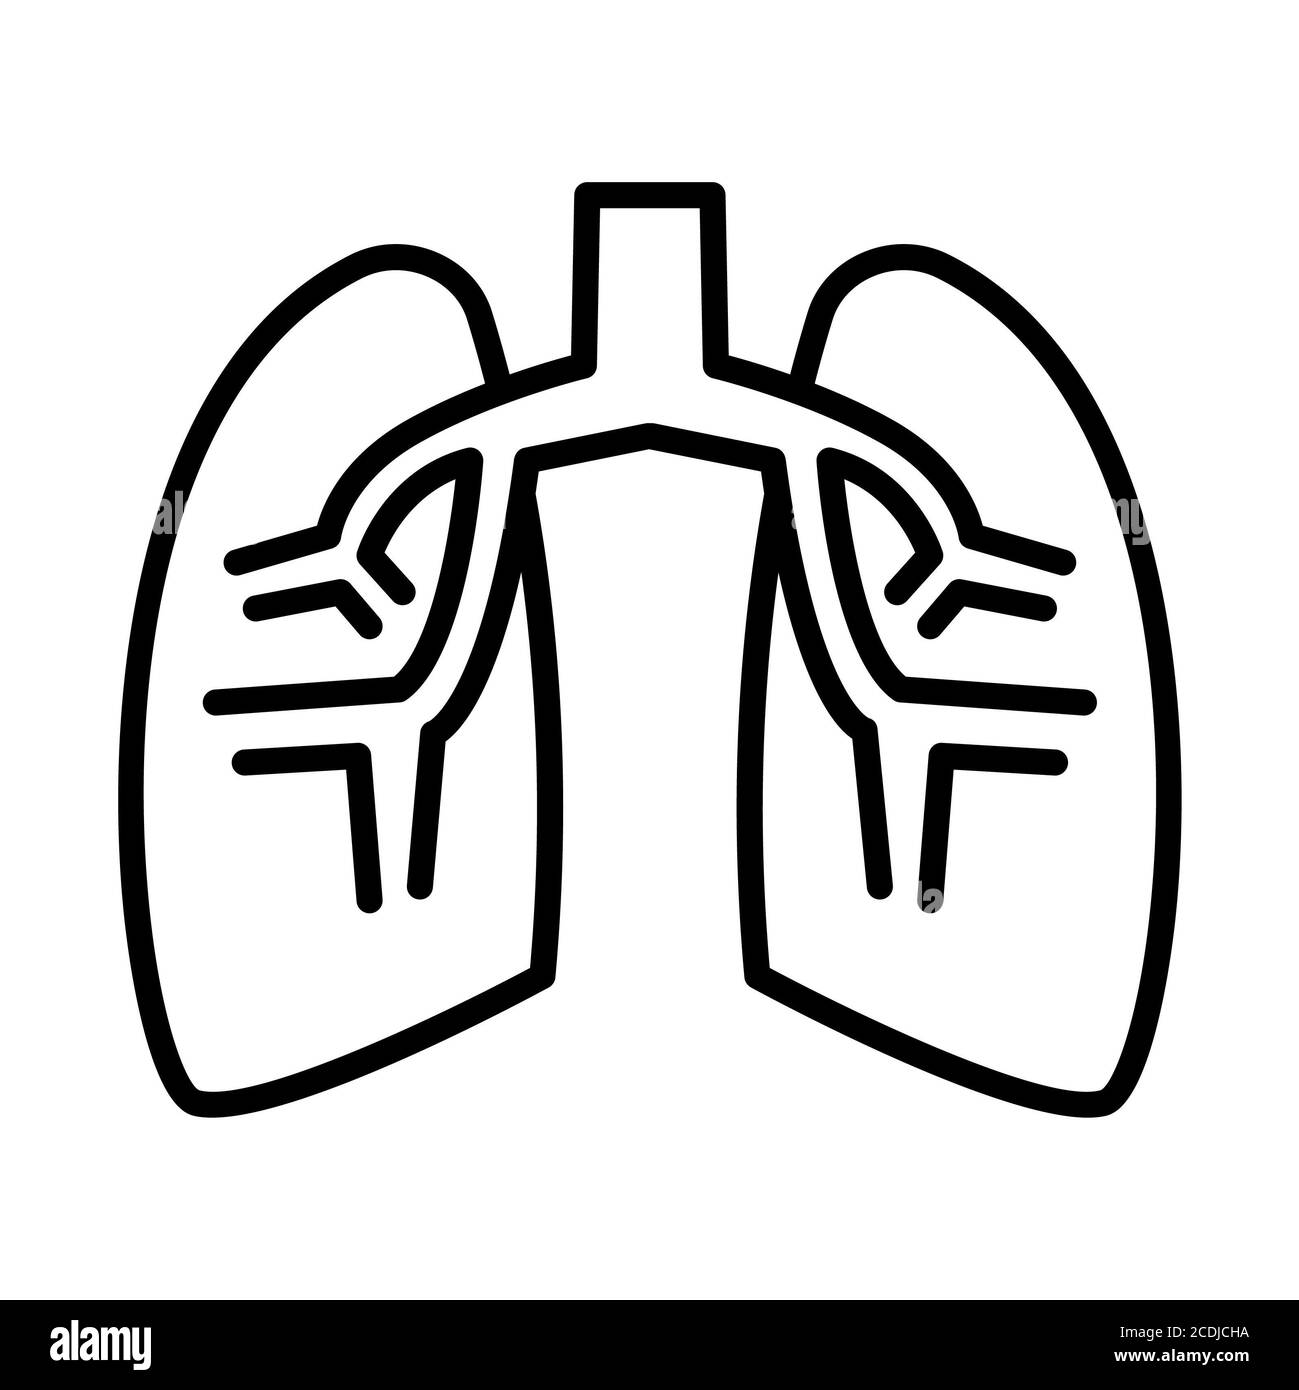 Lungs Anatomy Line Icon Stock Photo